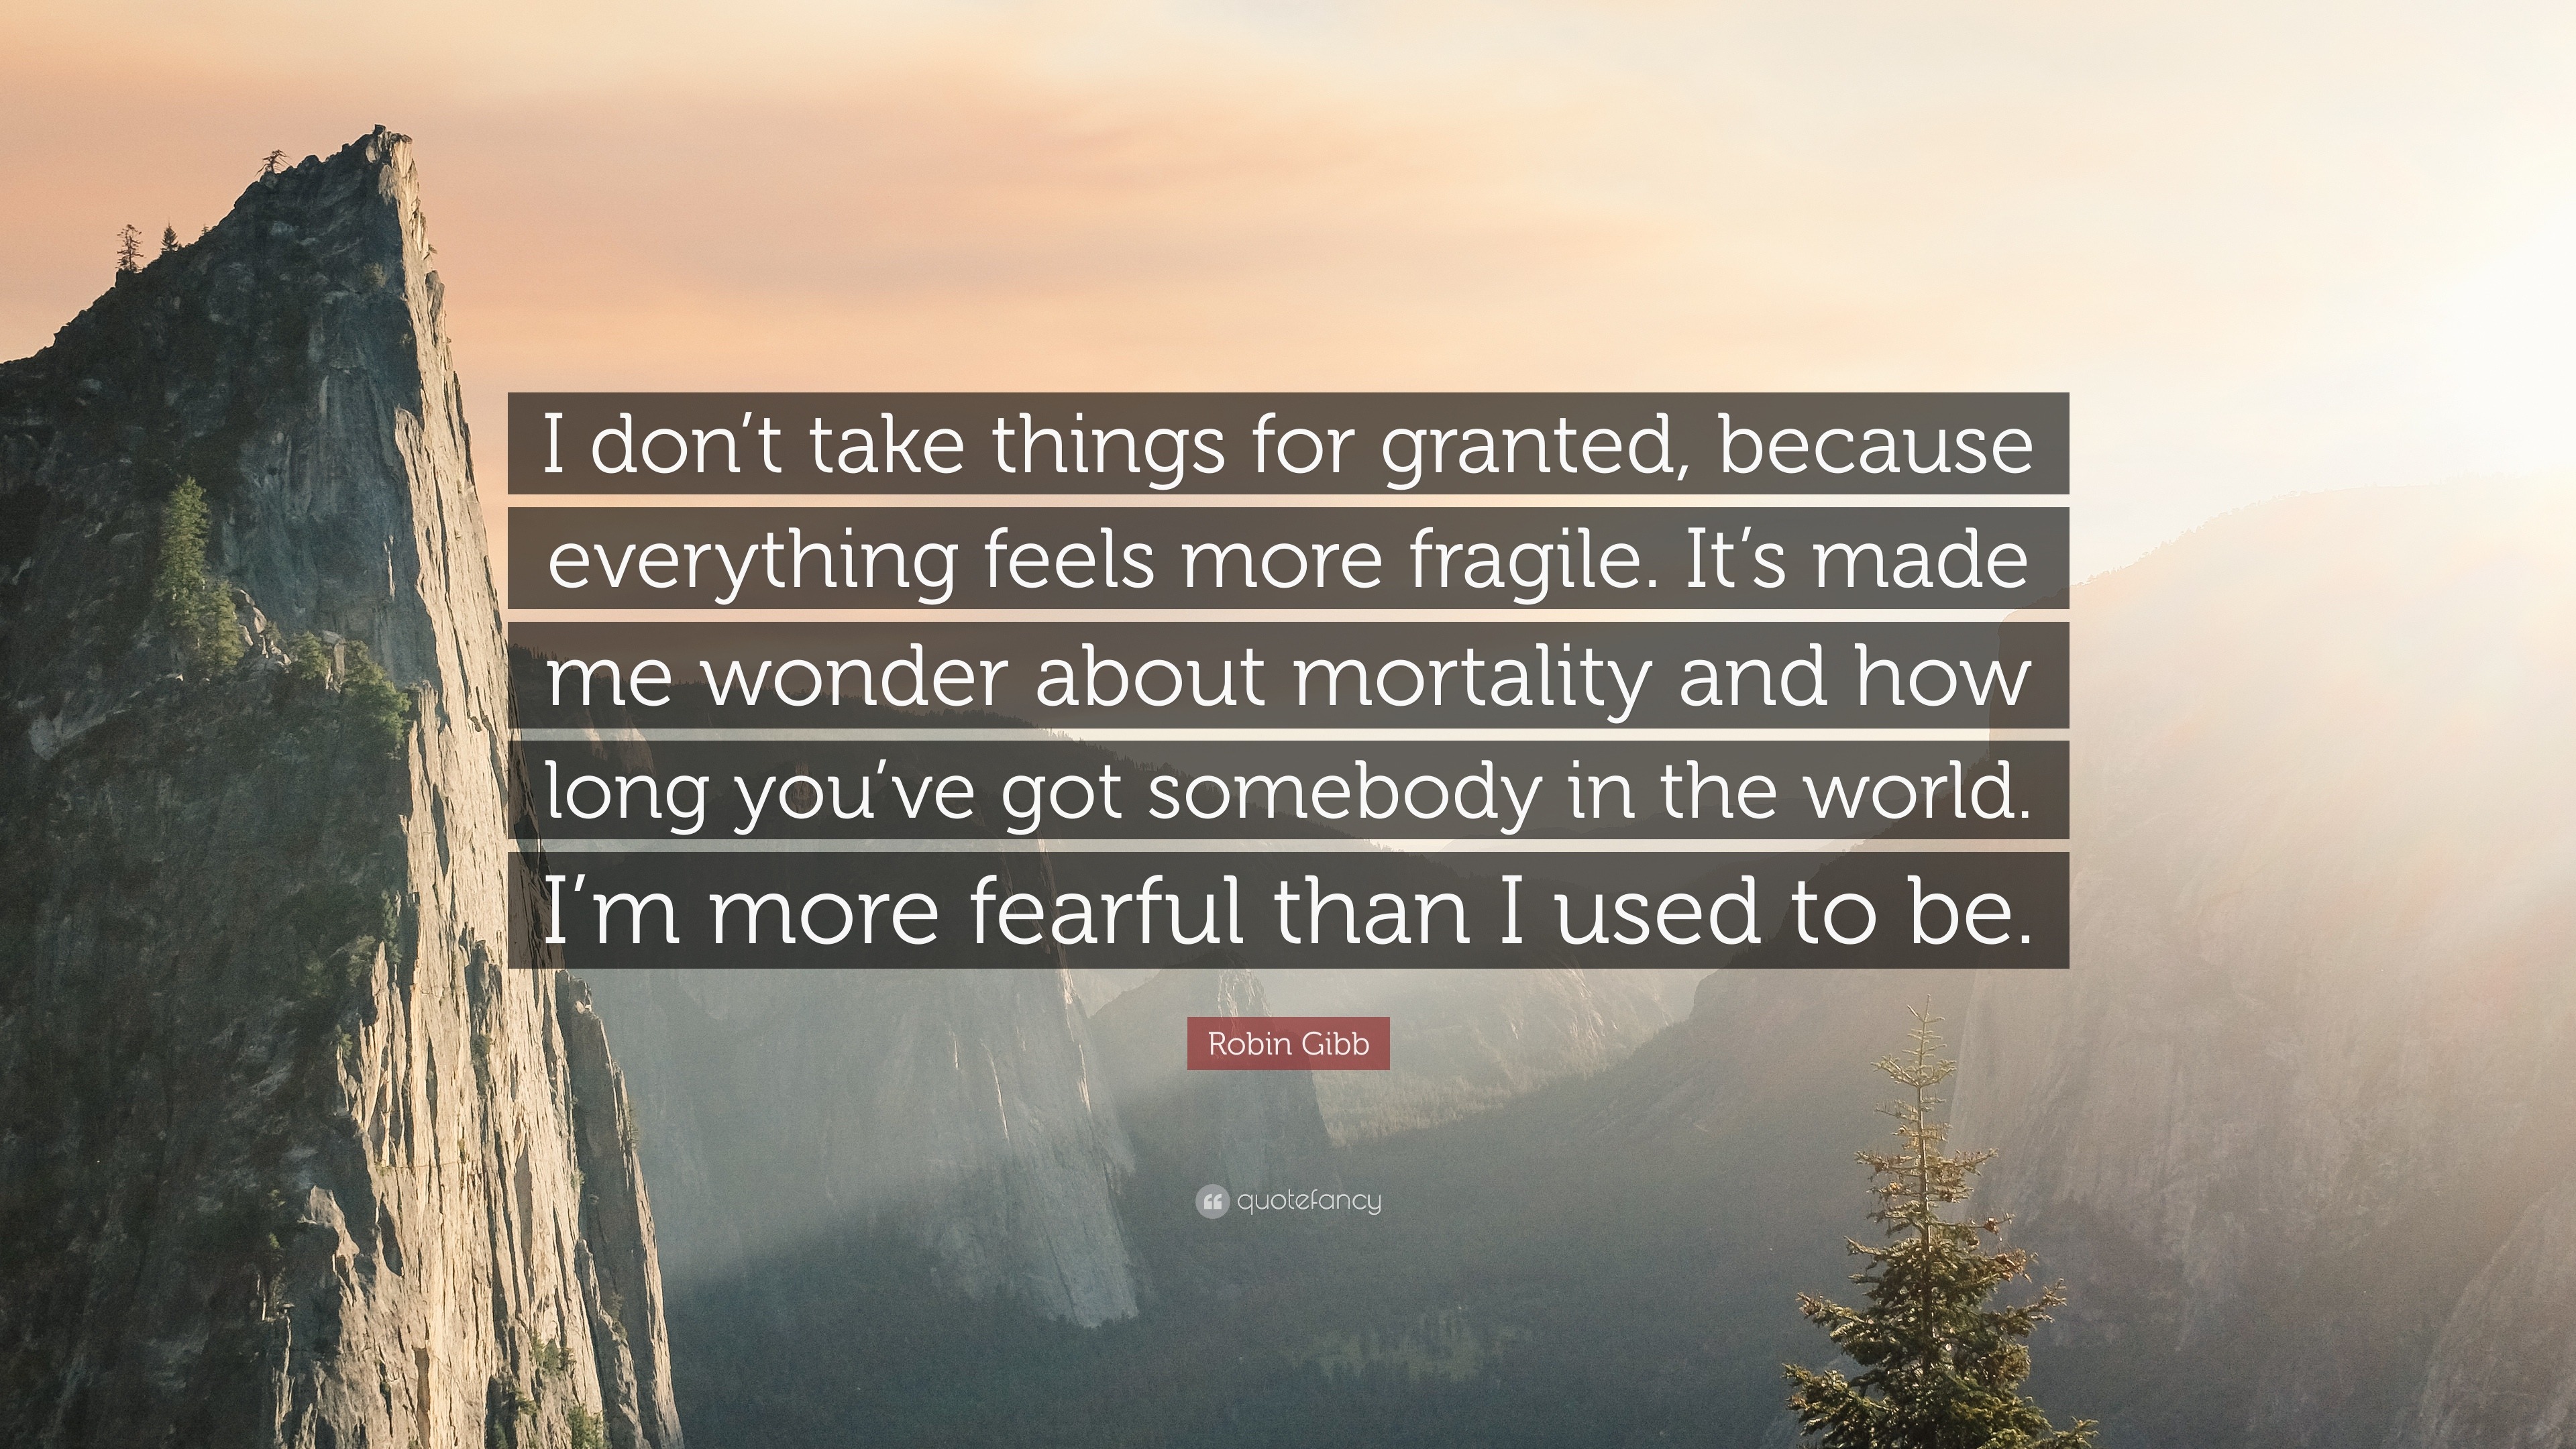 Robin Gibb Quote: “I Don't Take Things For Granted, Because Everything Feels More Fragile. It's Made Me Wonder About Mortality And How Long...”